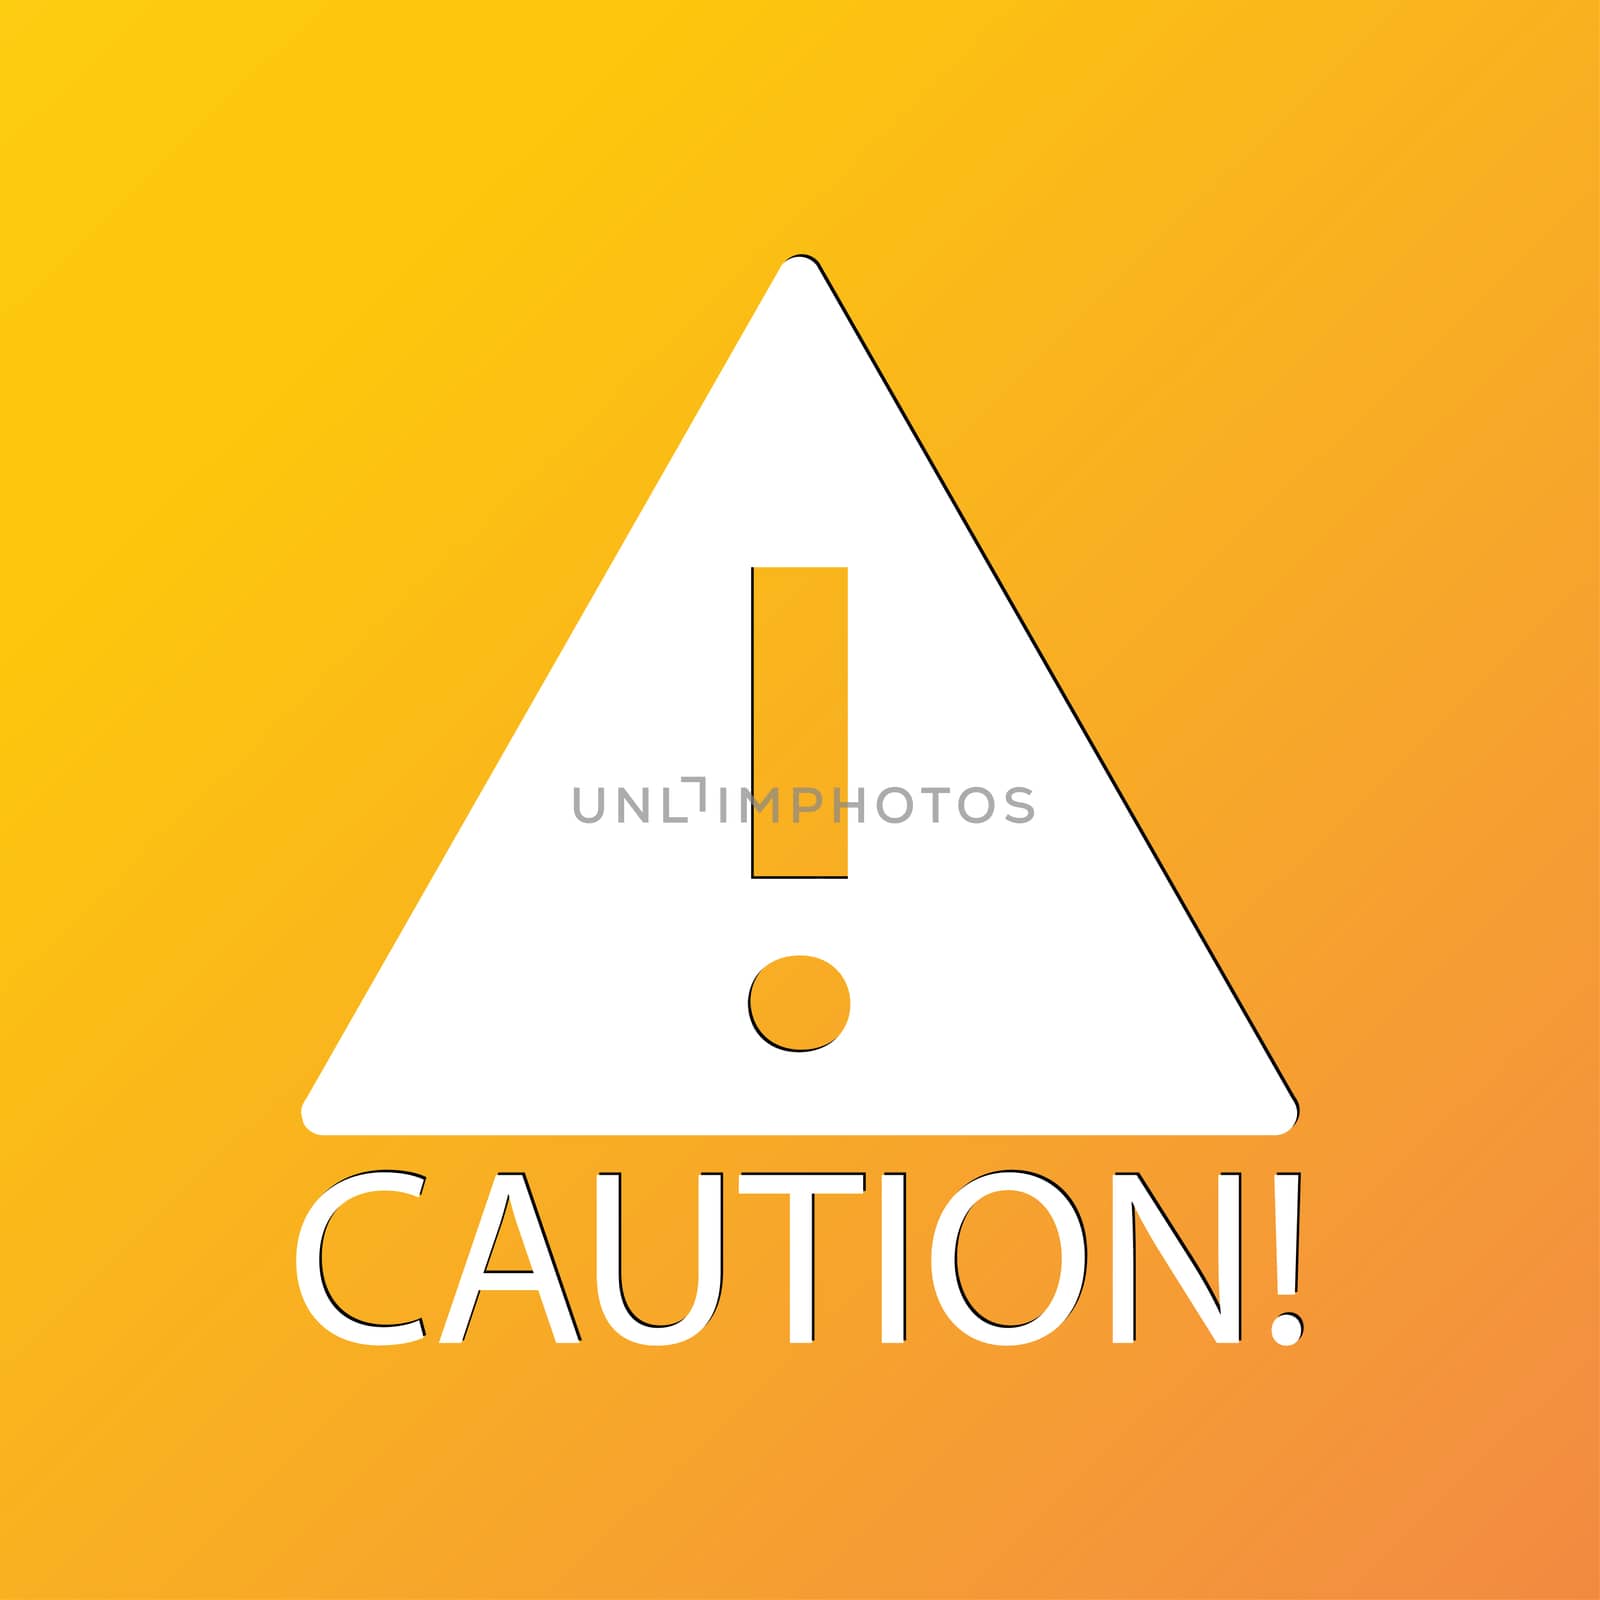 Attention caution icon symbol Flat modern web design with long shadow and space for your text. illustration